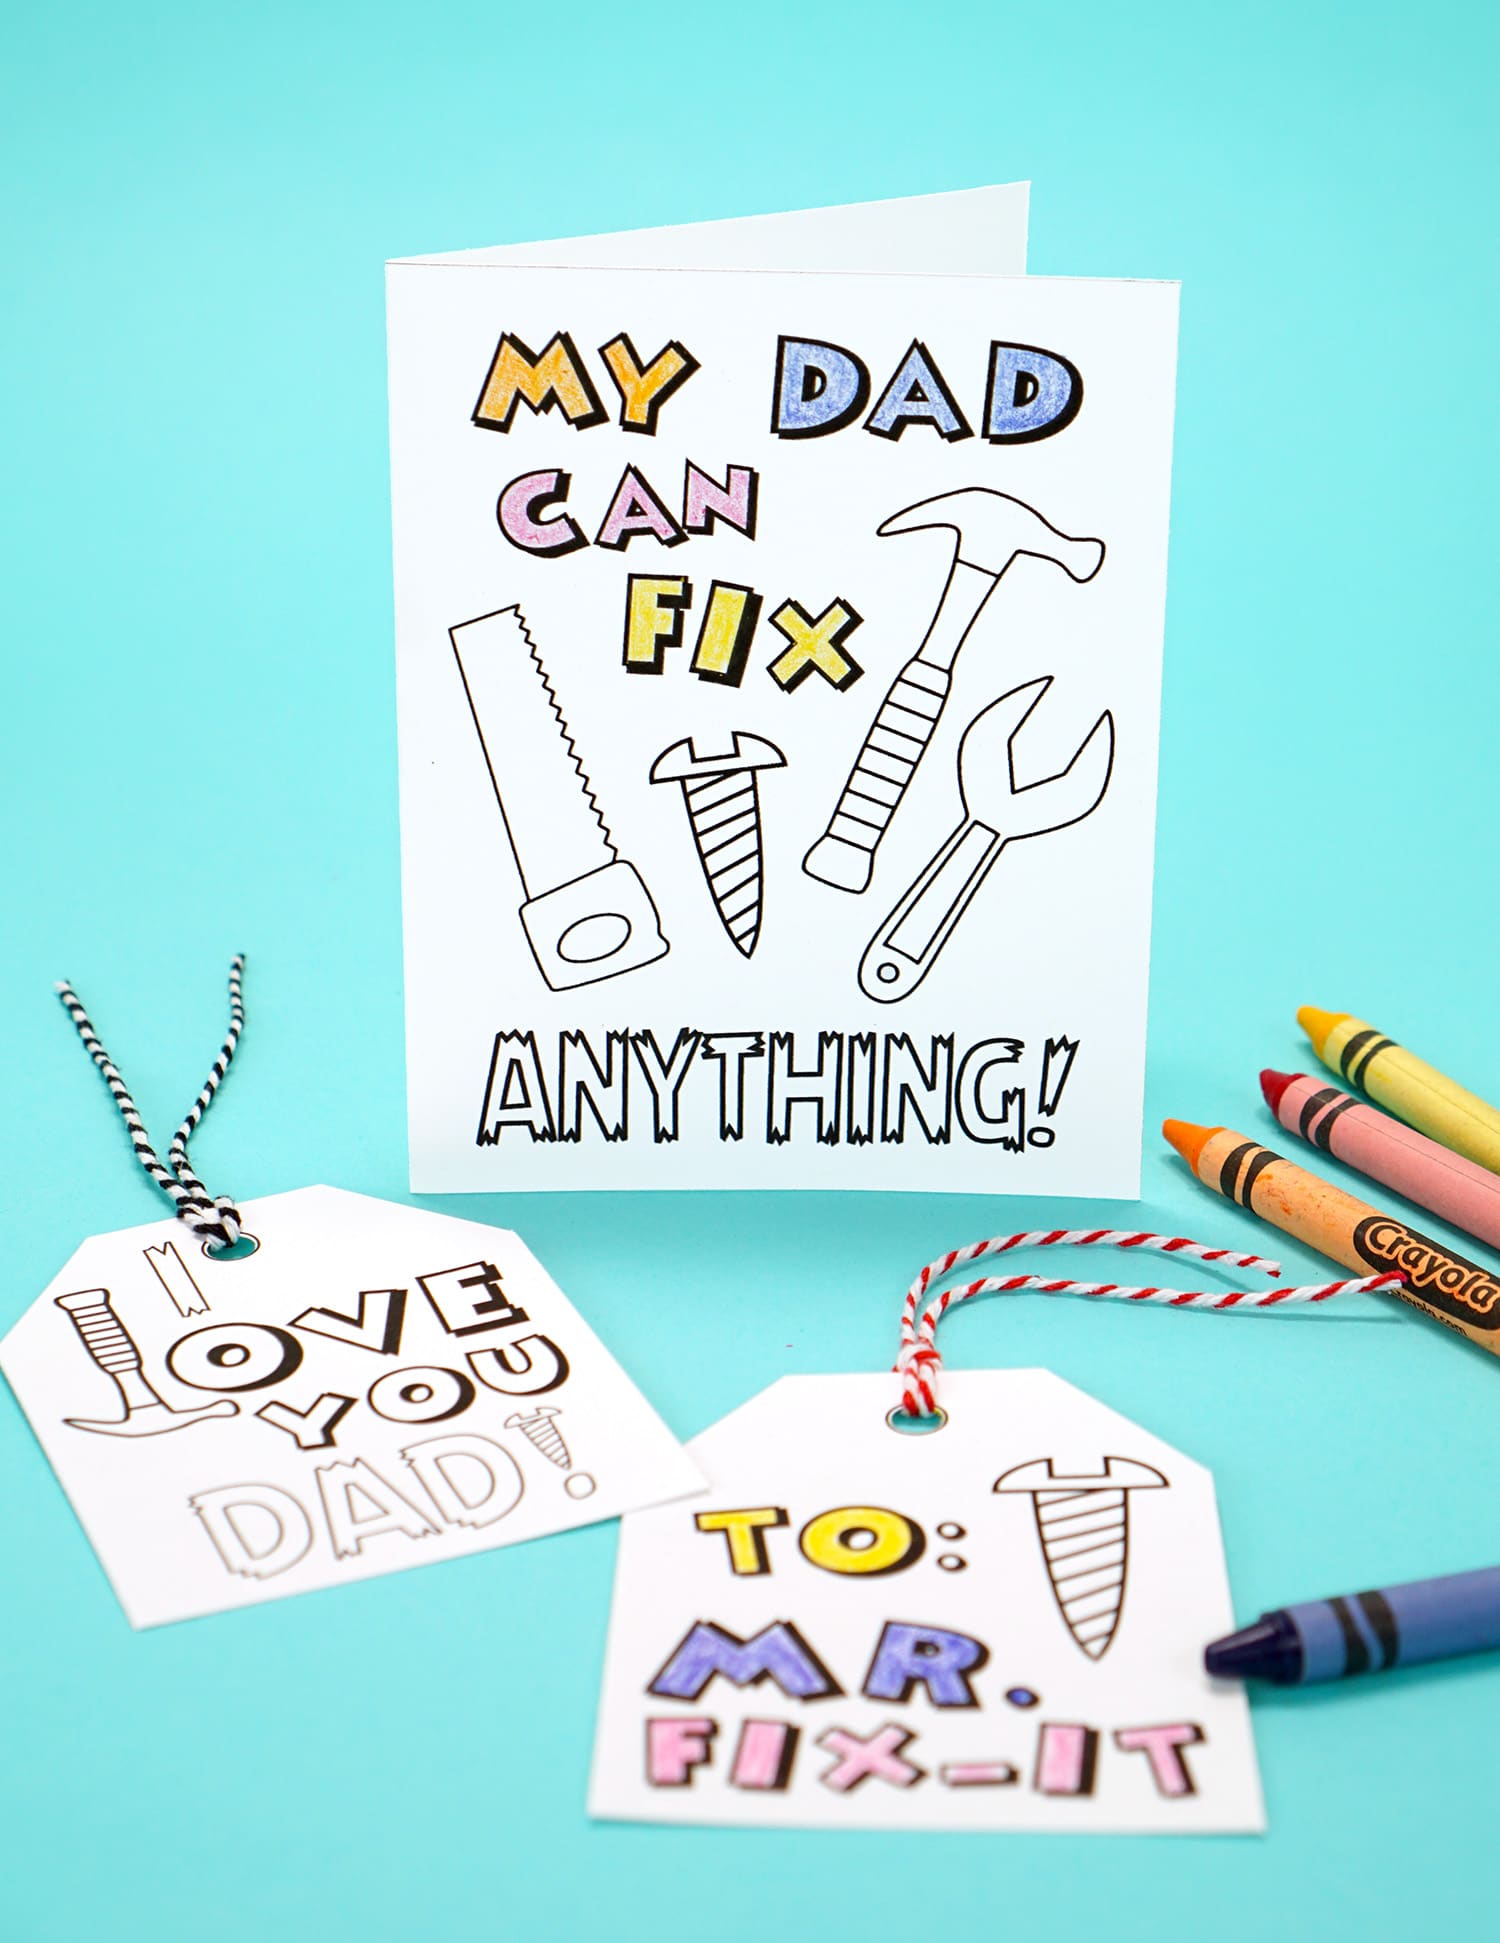 Printable Father's Day Card + Coloring Page - Happiness is Homemade